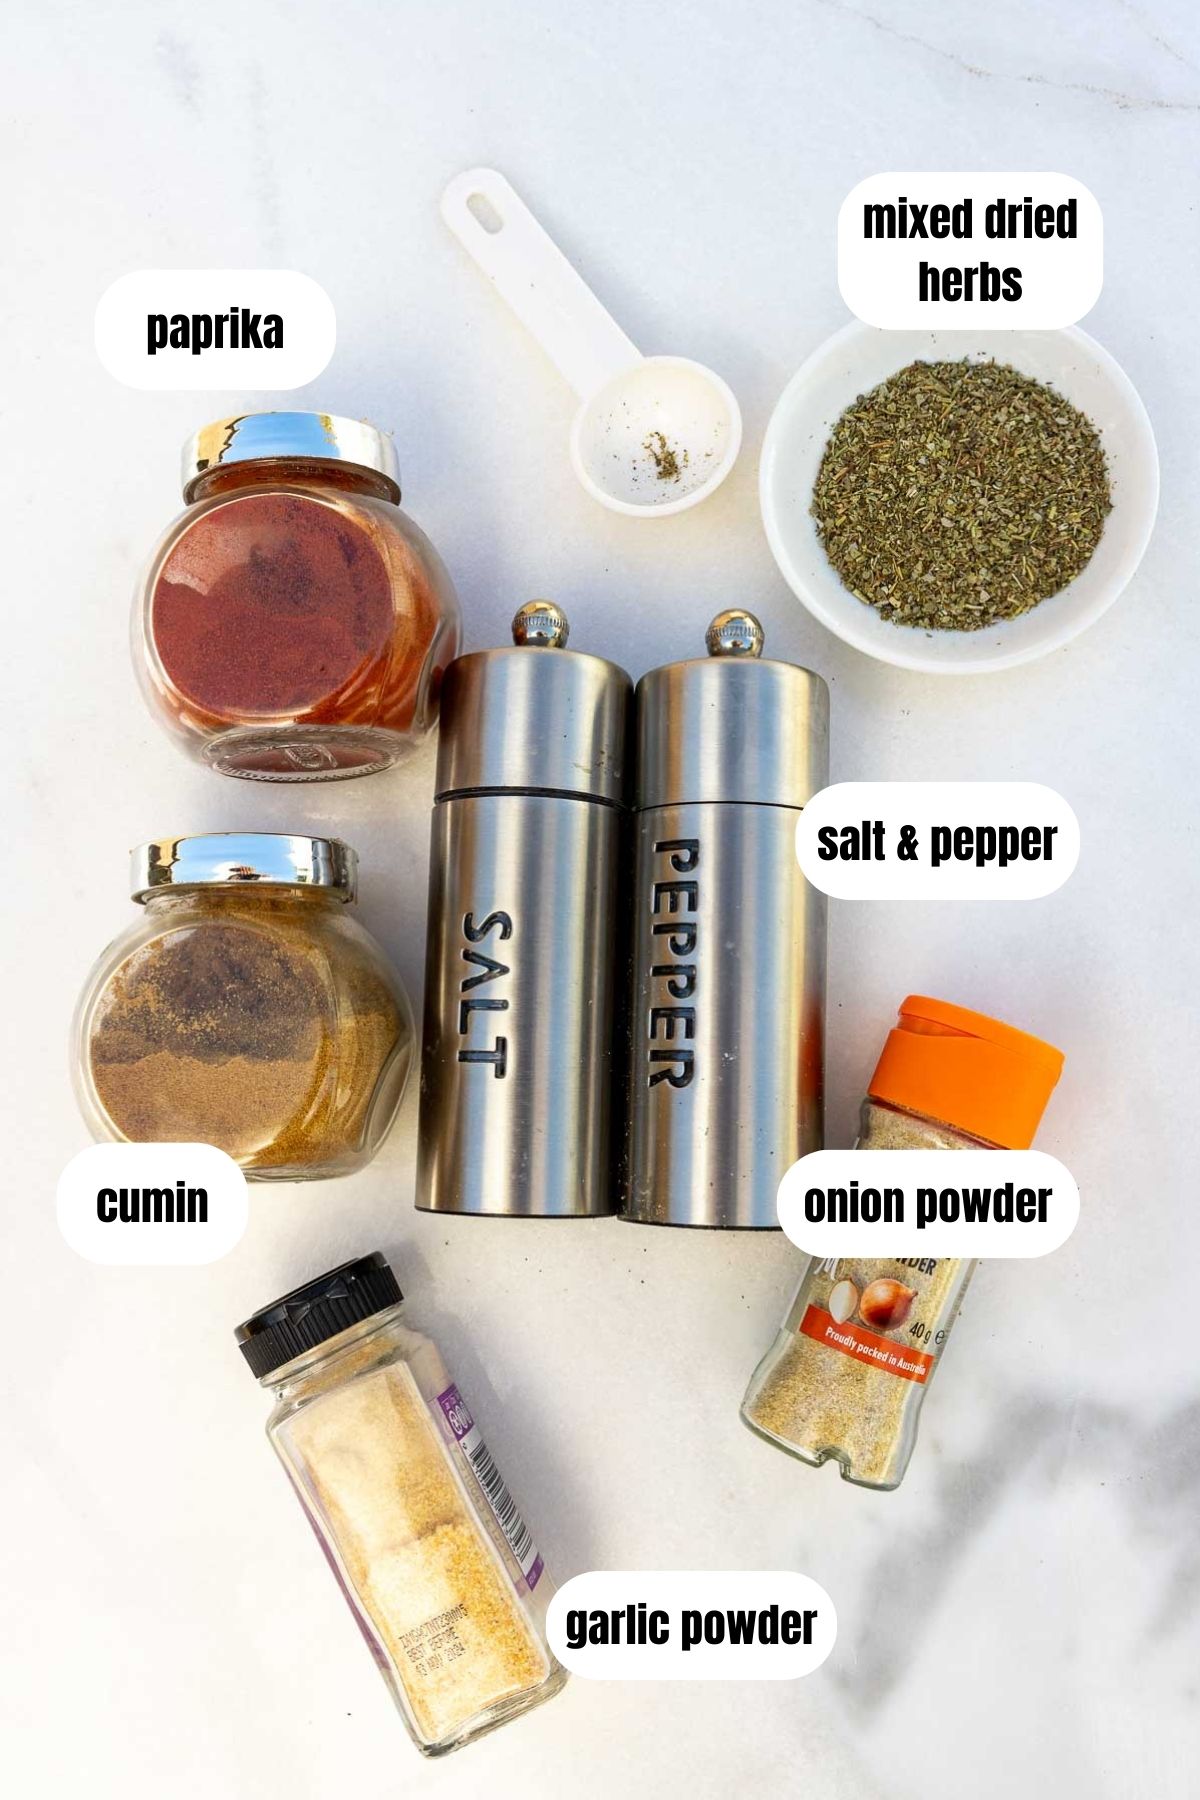 All the ingredients needed to make an all-purpose seasoning including paprika, mixed dried herbs, salt and pepper, cumin, garlic powder and onion powder.